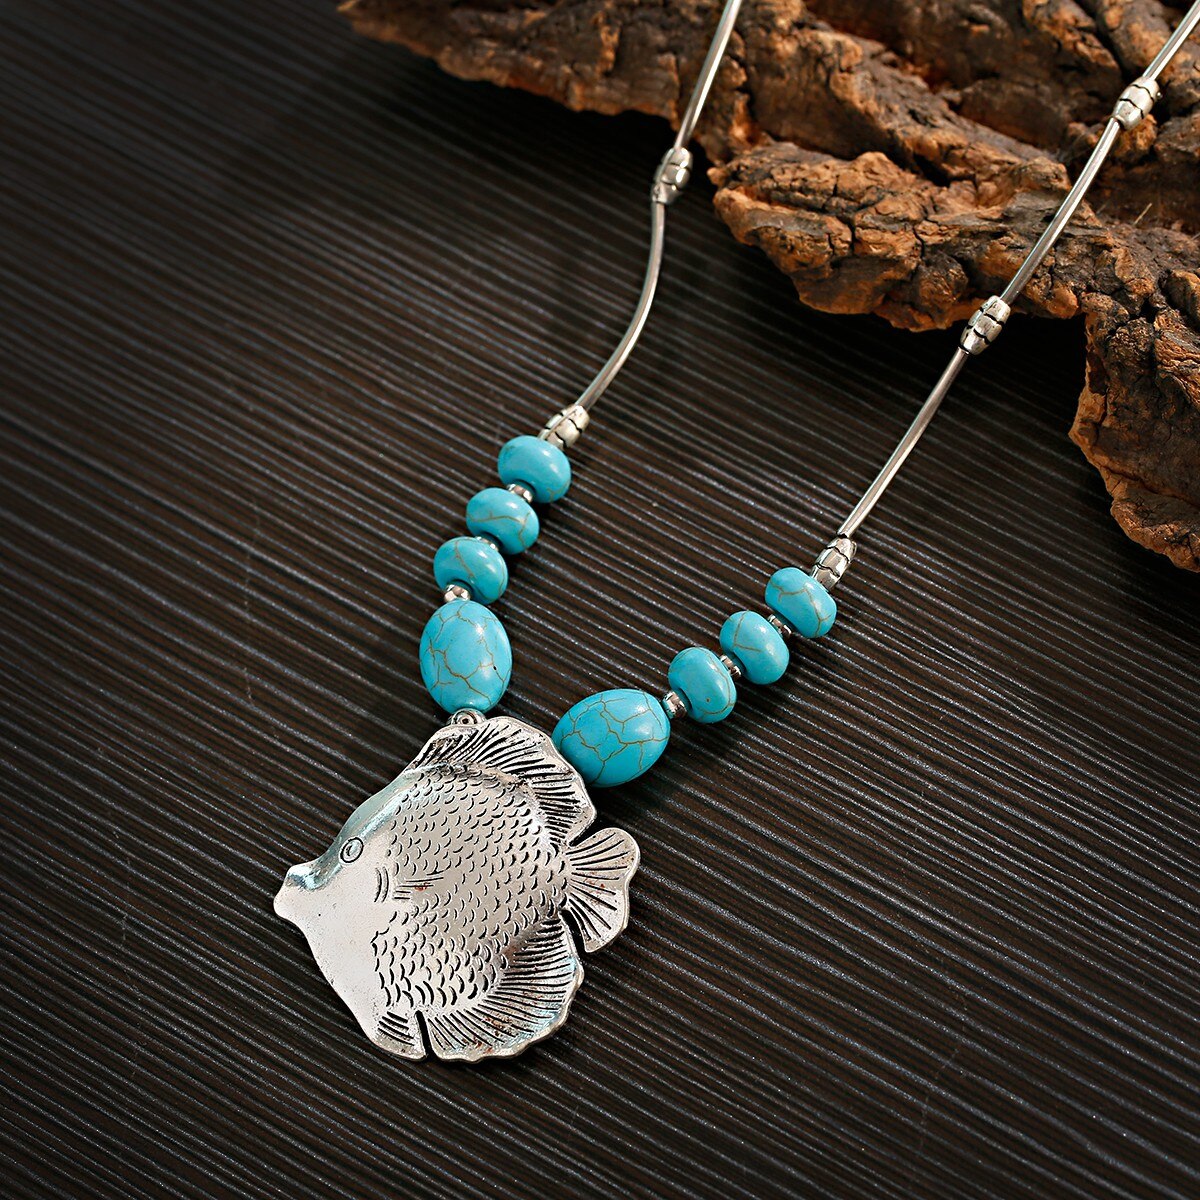 2022-Ethnic-Gypsy-Boho-Necklace-For-Women-Jewelry-Silver-Color-Fish-Shape-Turquoises-Indian-Necklace-1005004708775510-5